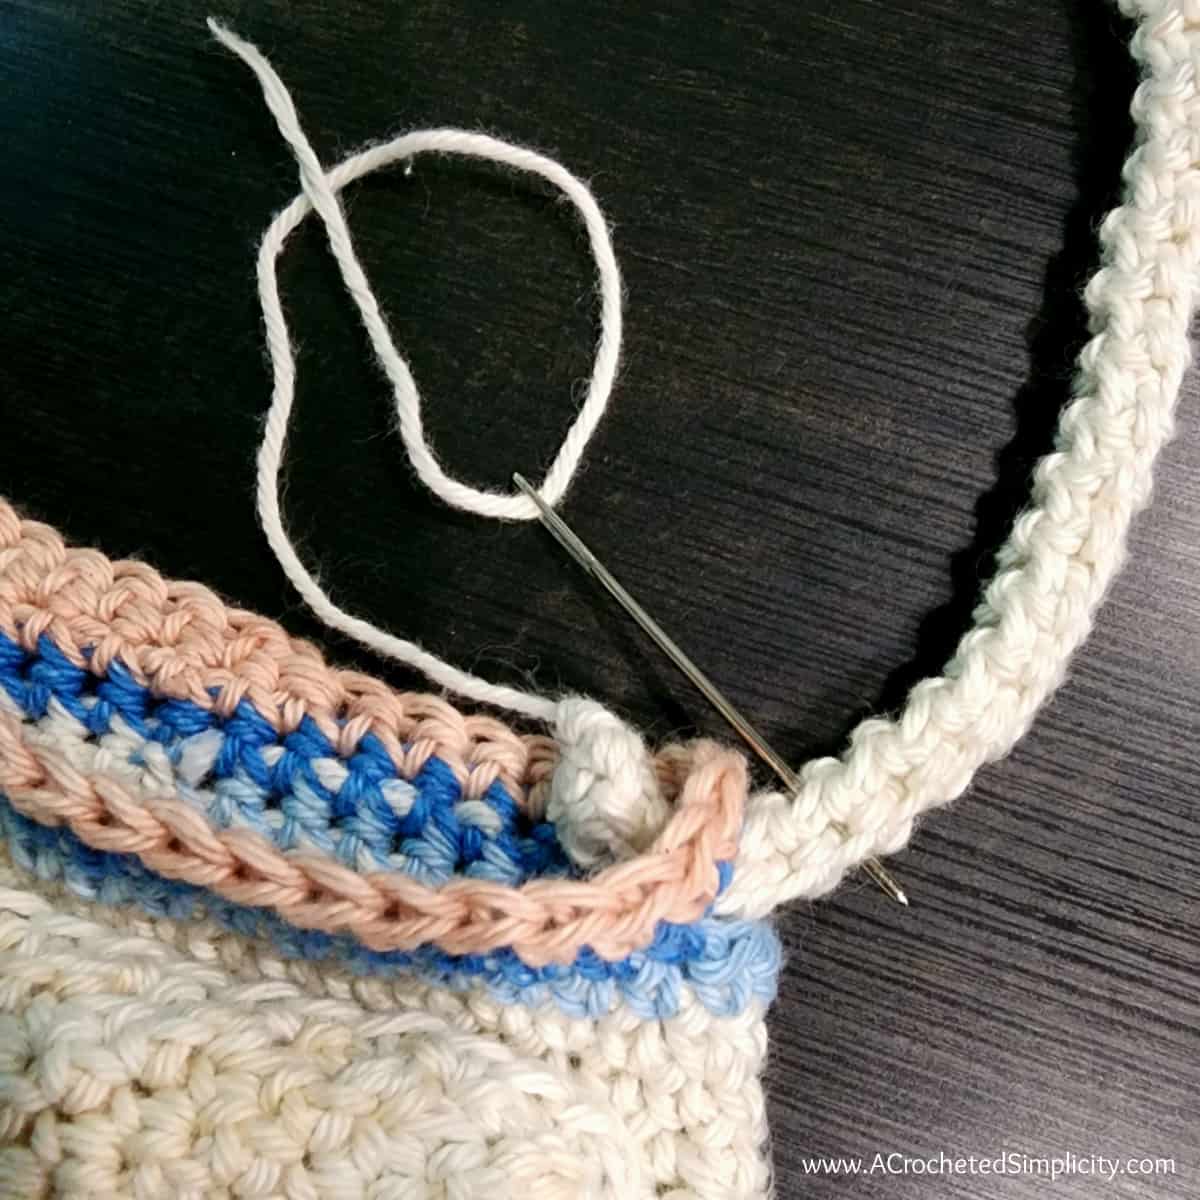 Adjustable crochet strap being secured to the top of the water bottle holder.